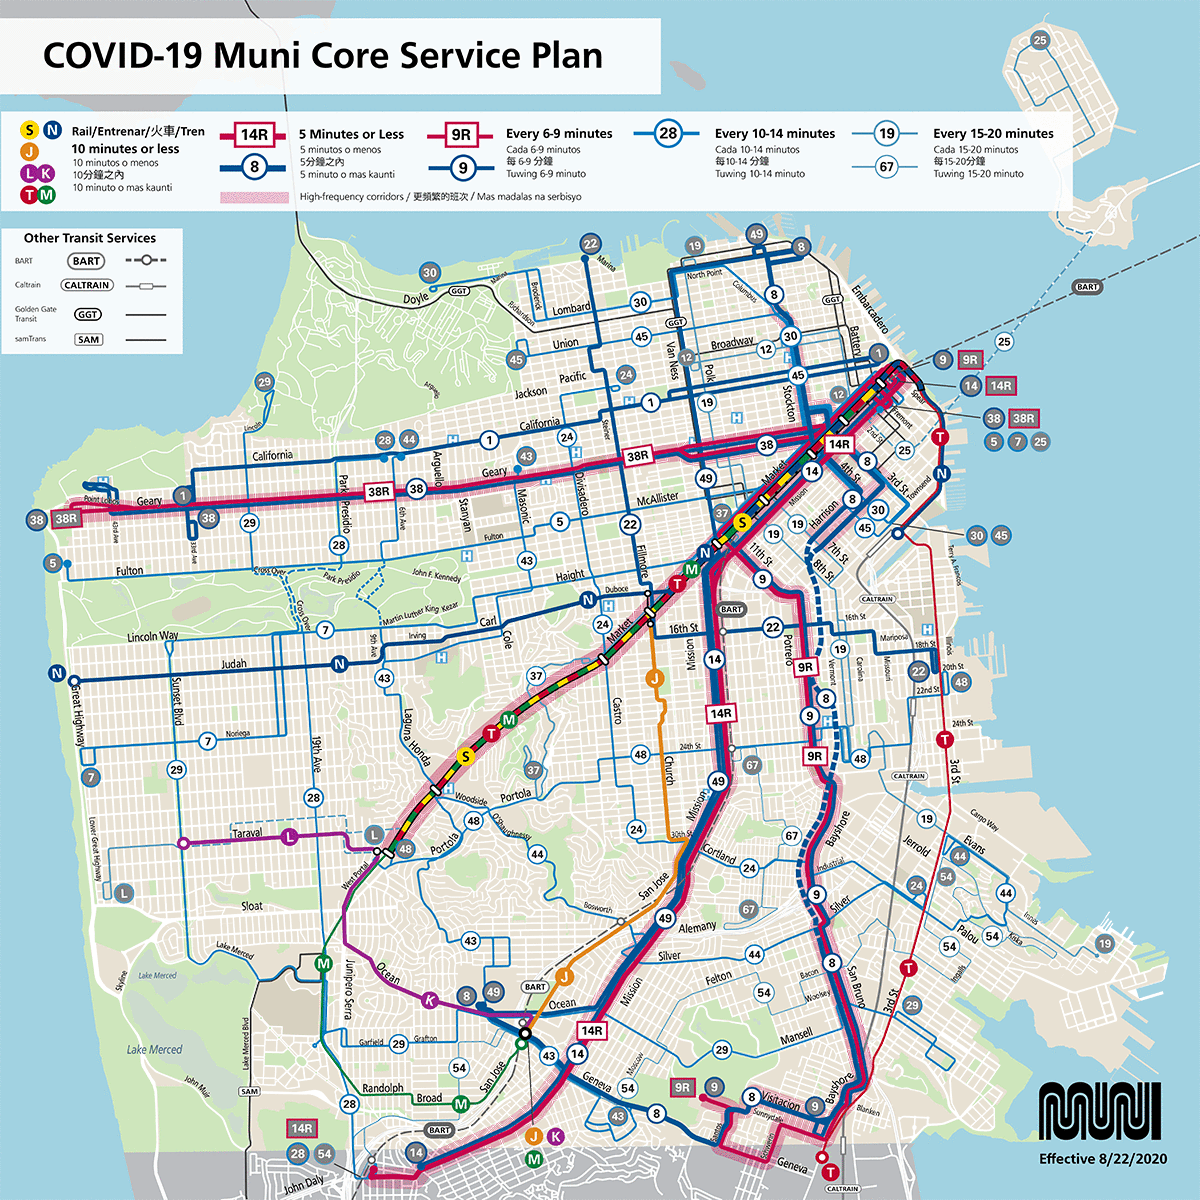 Map: New Muni service map shows bus and rail routes restored August 22 with existing Muni service. This new map also highlights high-frequency corridors.